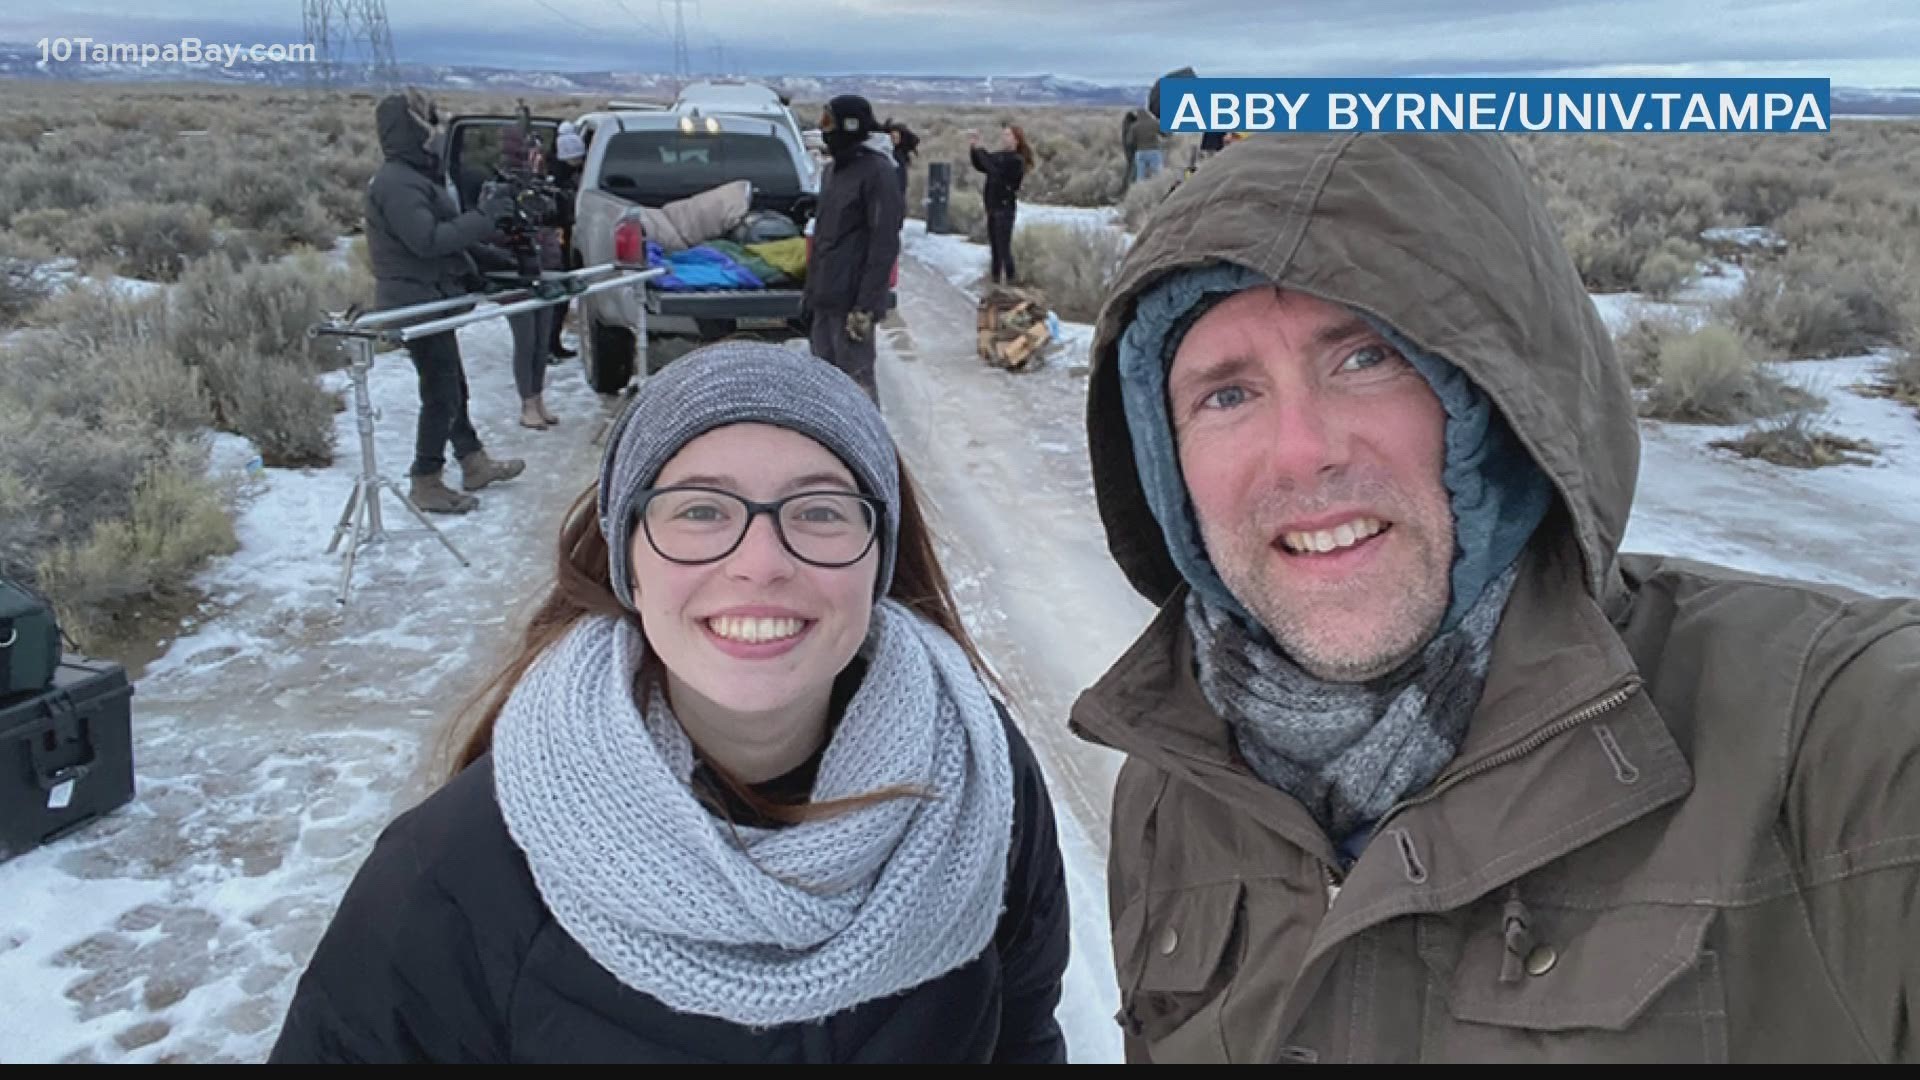 Abby Byrne got to do a life-changing internship with a former UT alum during the COVID pandemic. It set her up for a career in film.